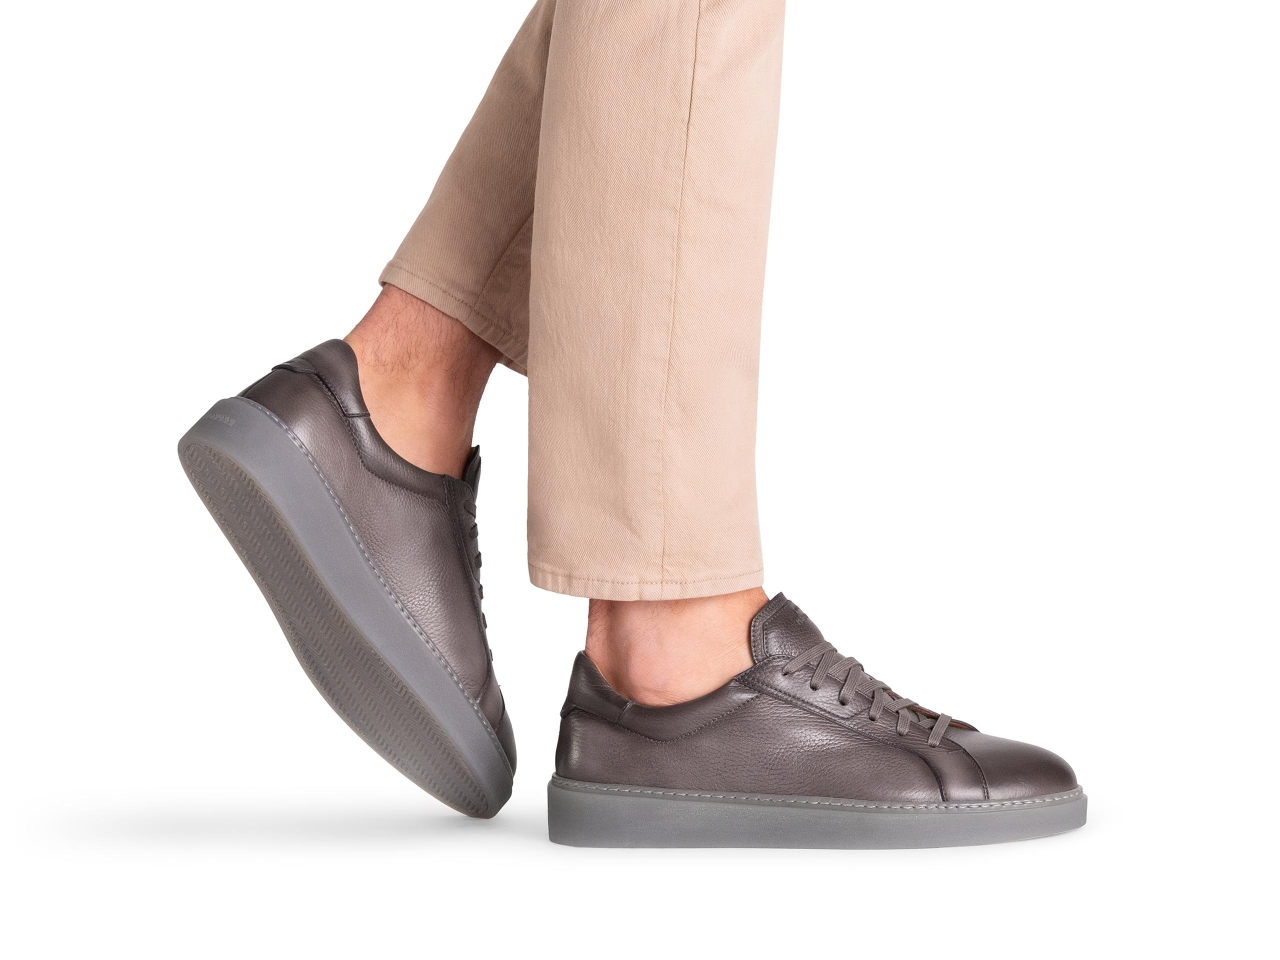 The Rio II Grey pairs well with khaki pants